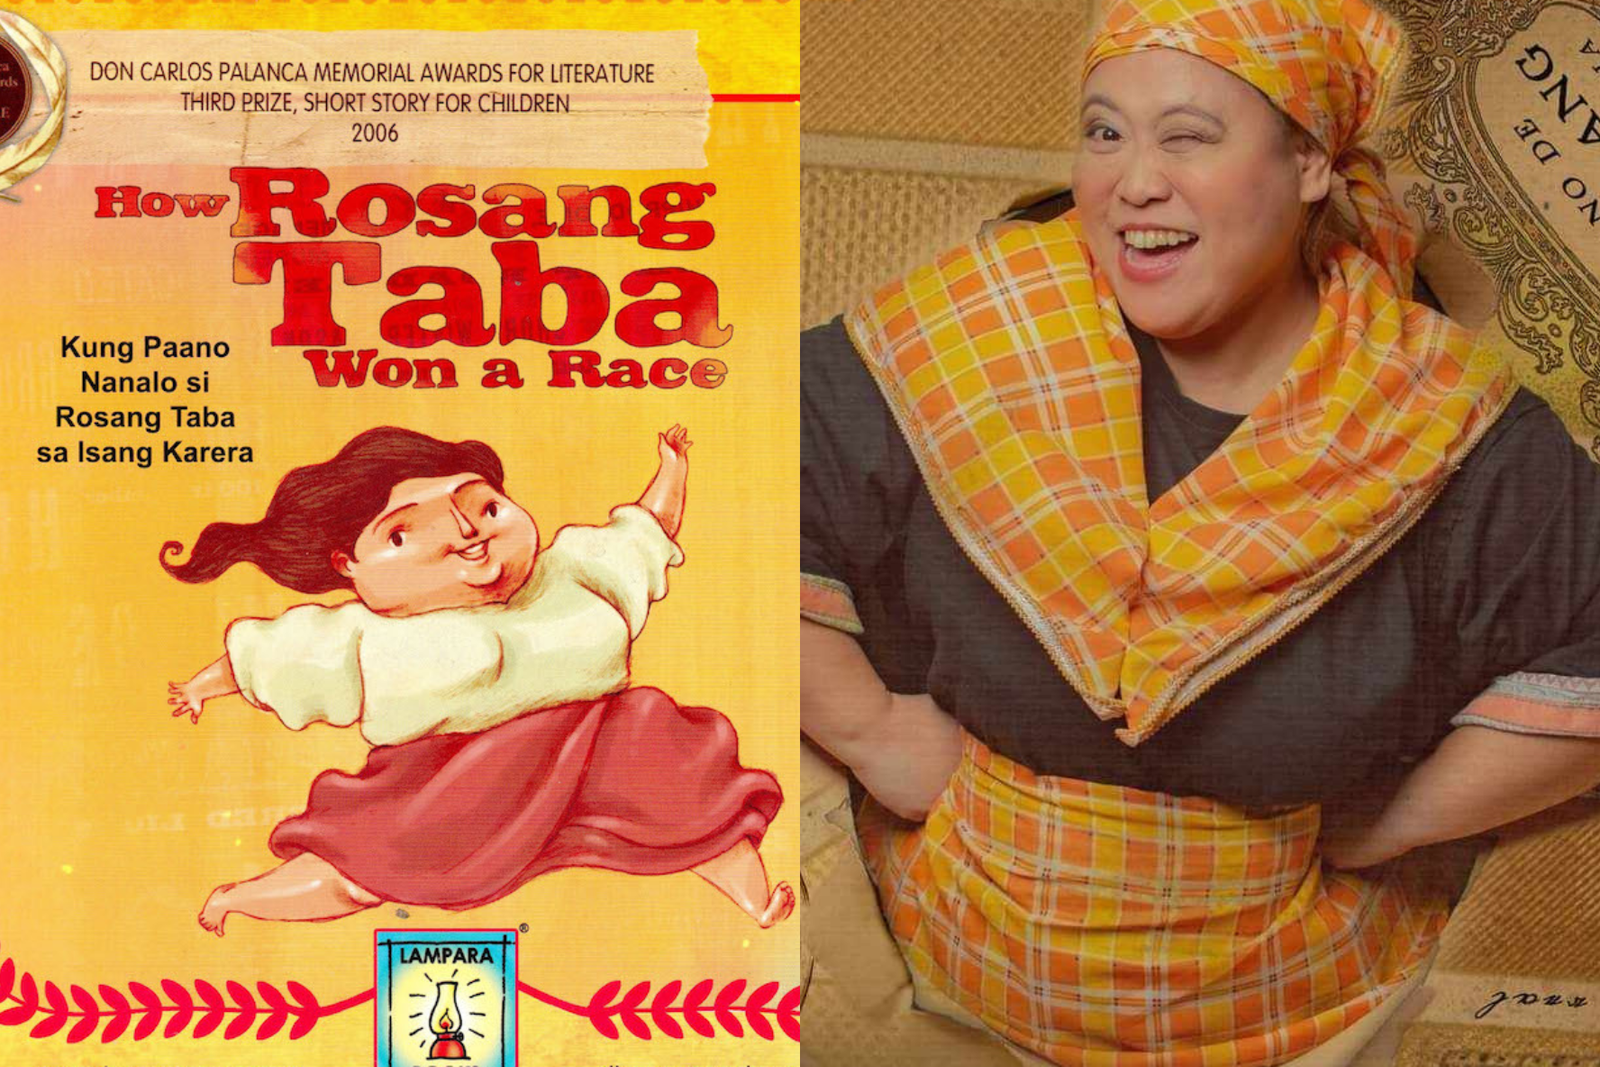 LOOK: This Filipino Children’s Book Is Being Adapted to the Stage Again